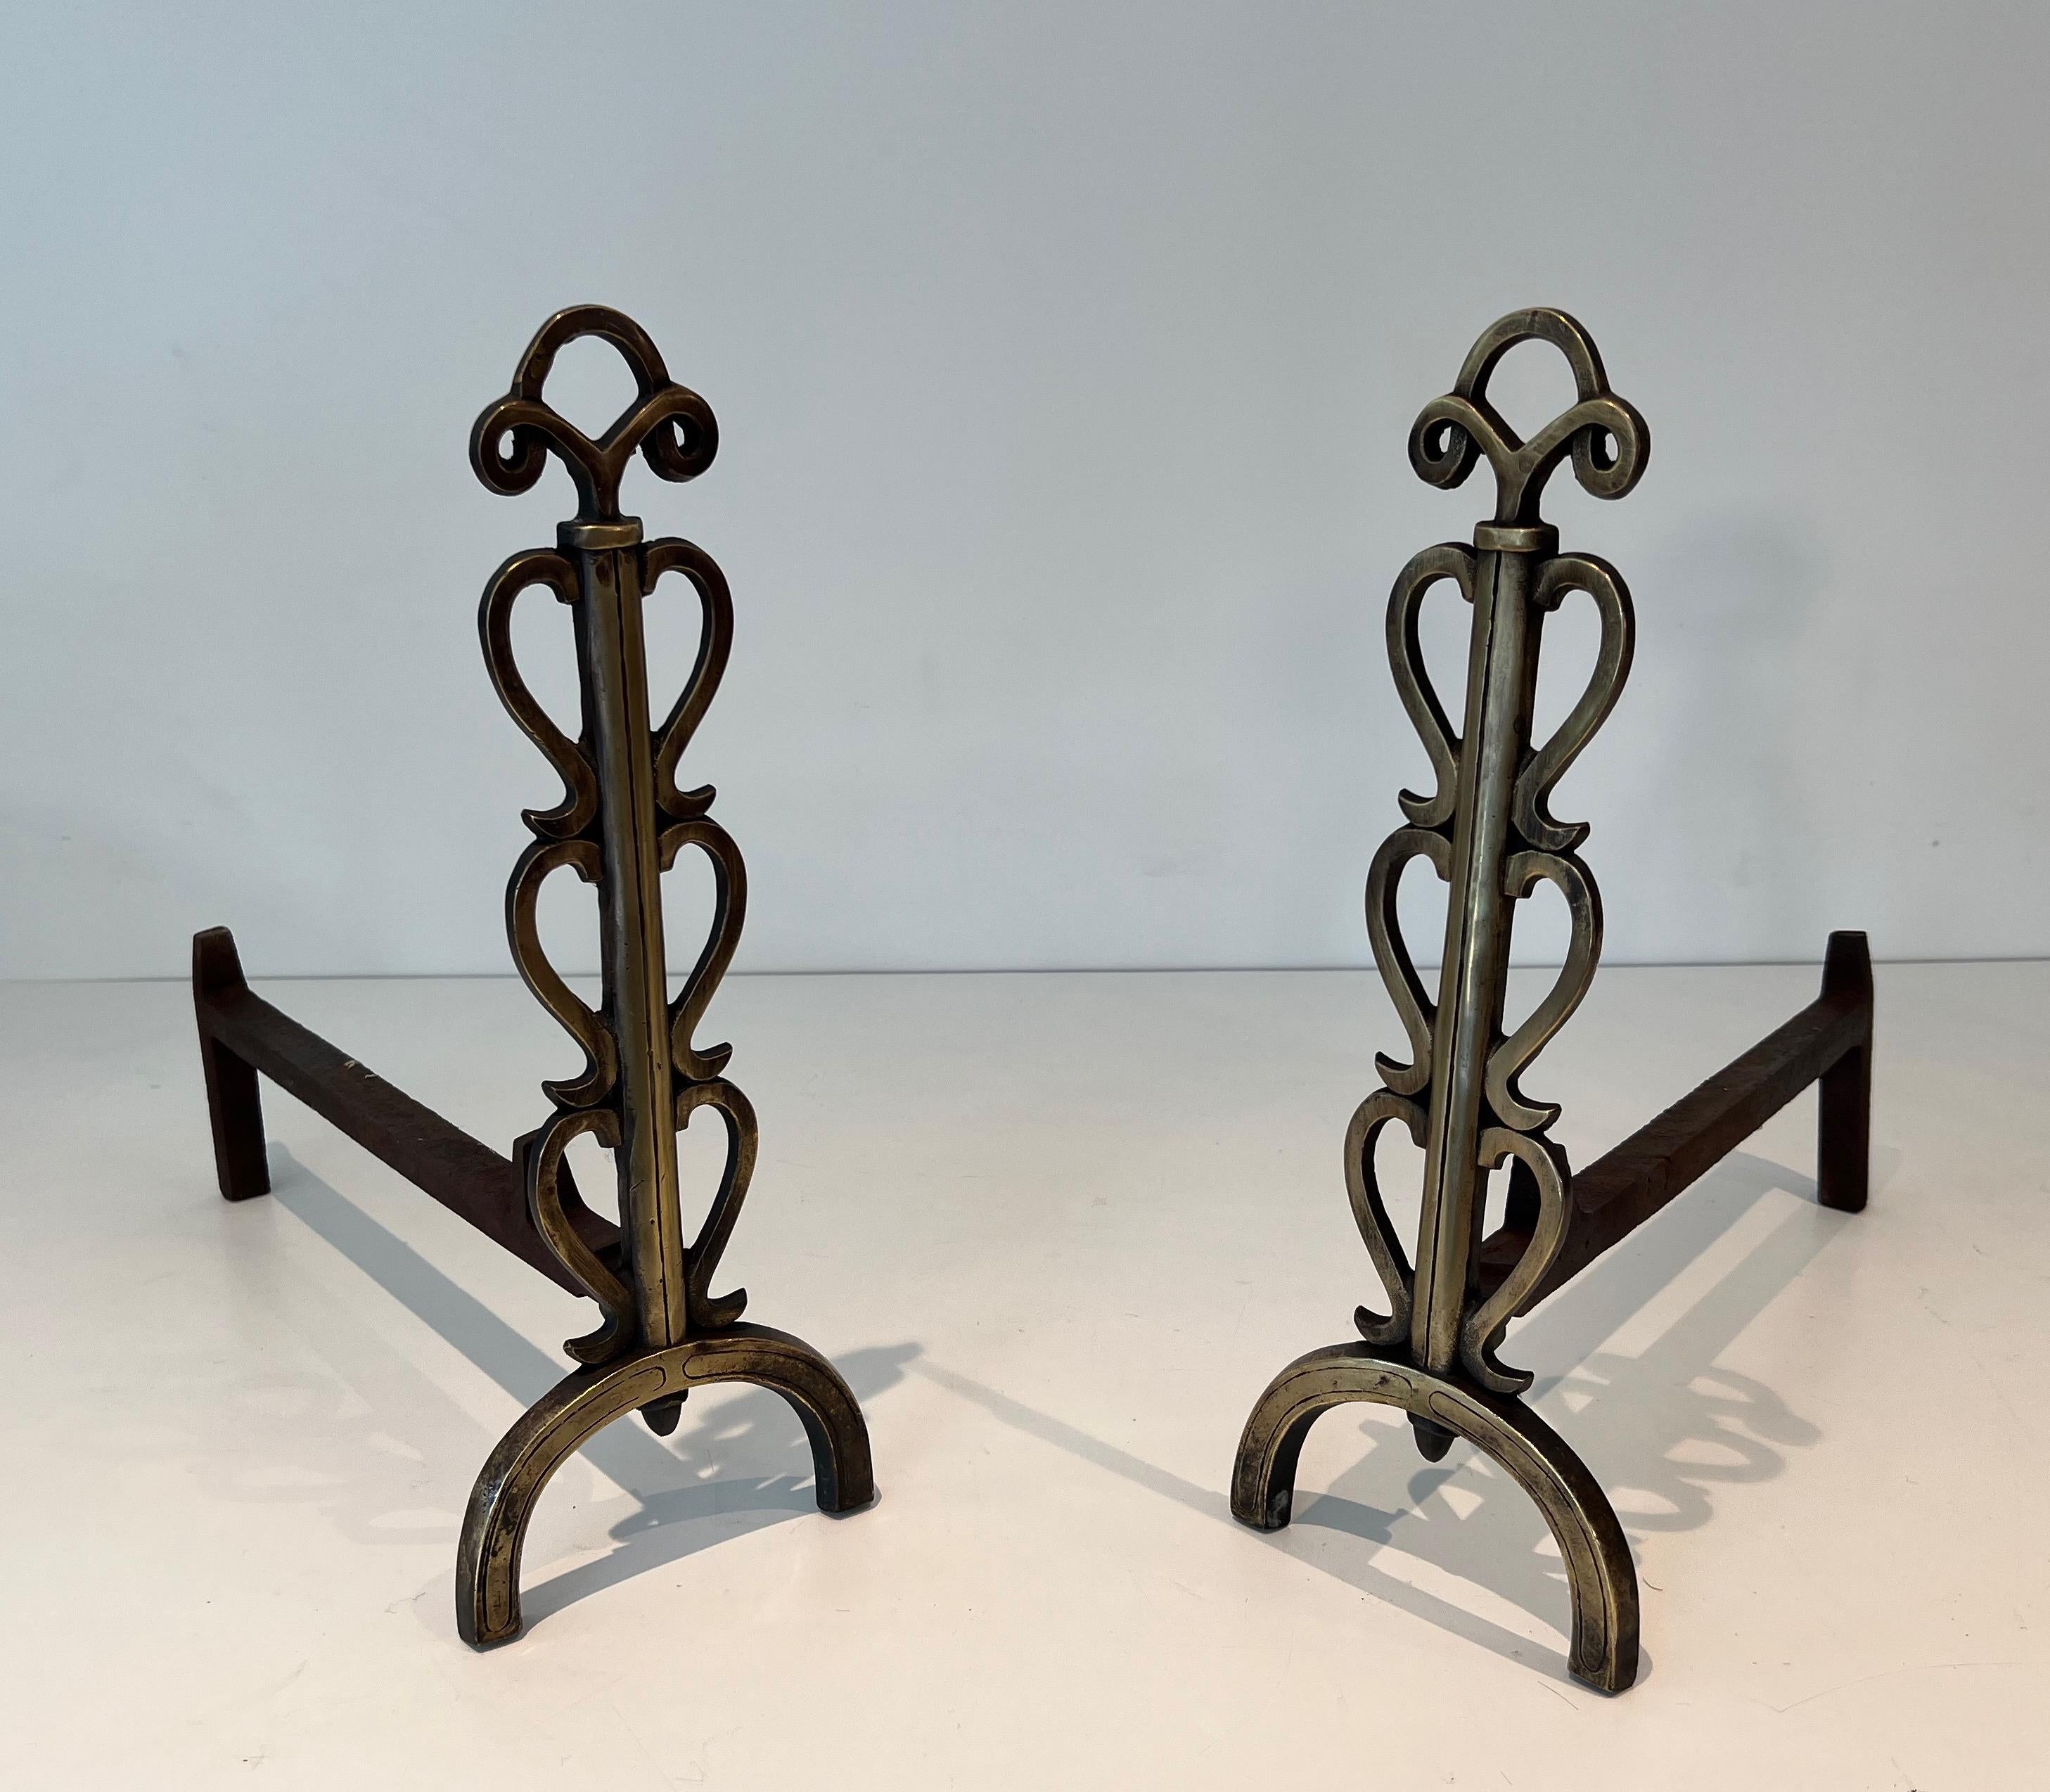 This interesting pair of design andirons is made of brass and wrought iron. This is a French work in the style of famous designer Raymond. Subes. Circa 1970